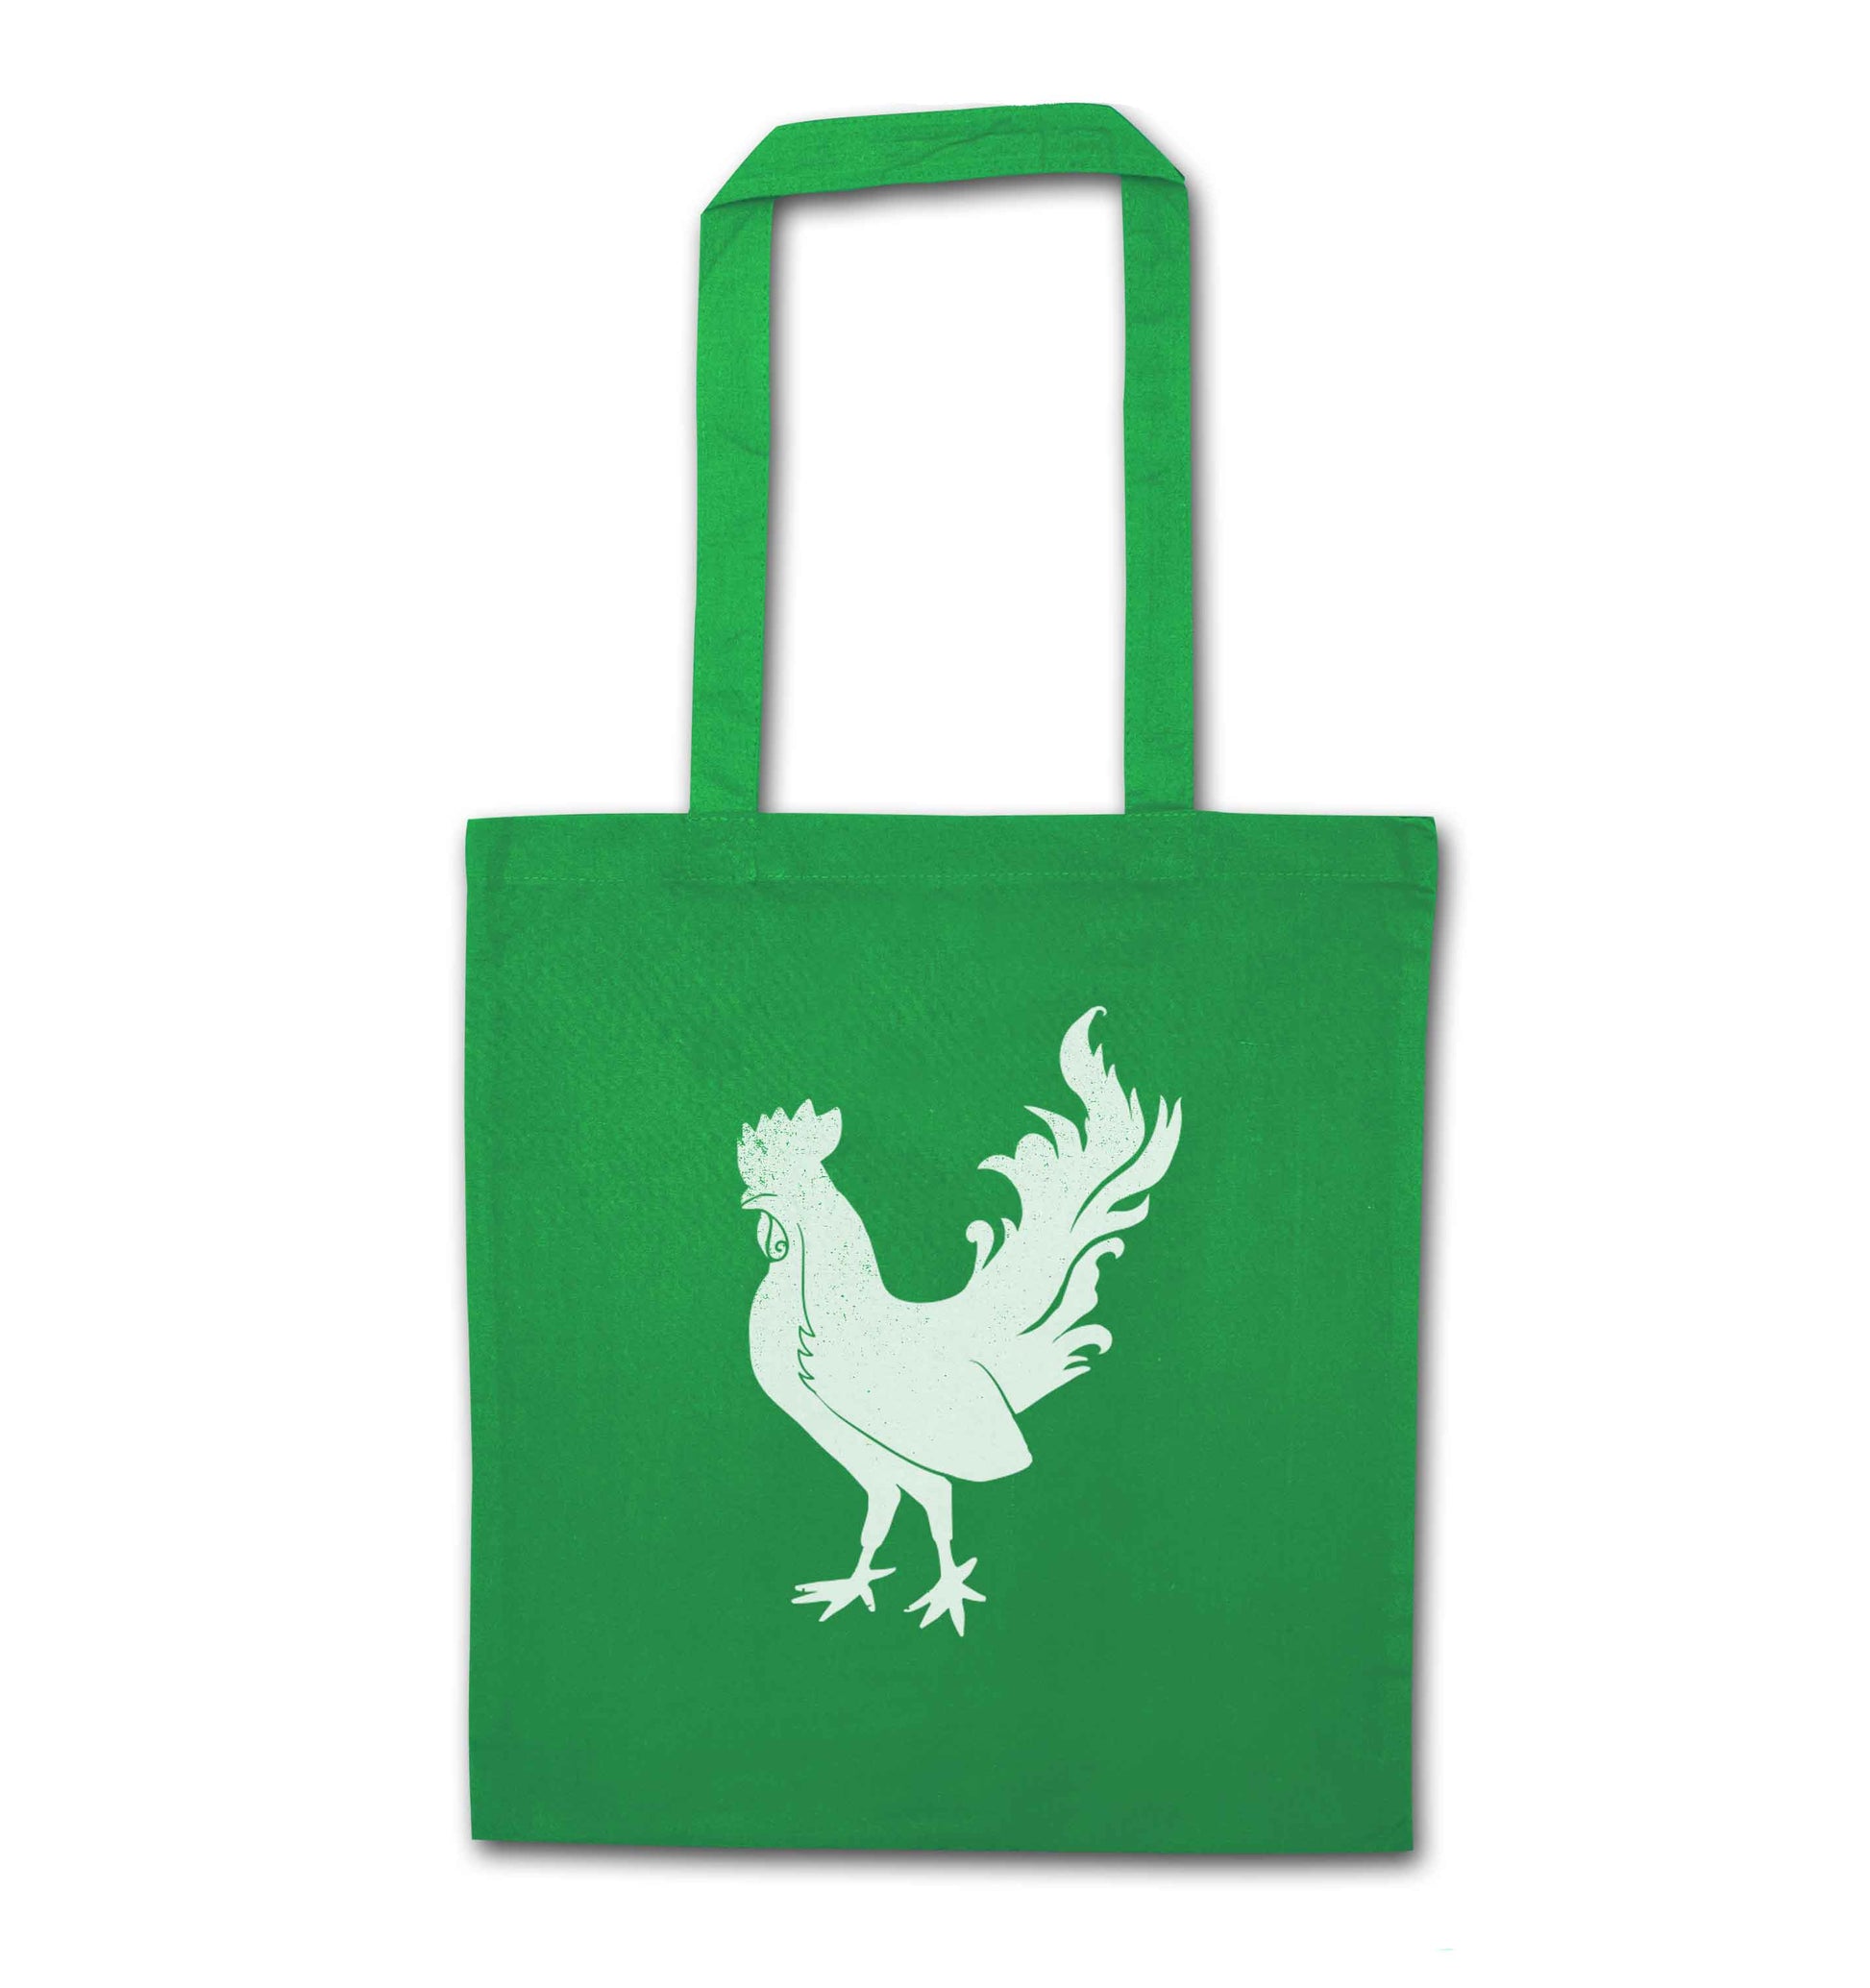 Rooster green tote bag